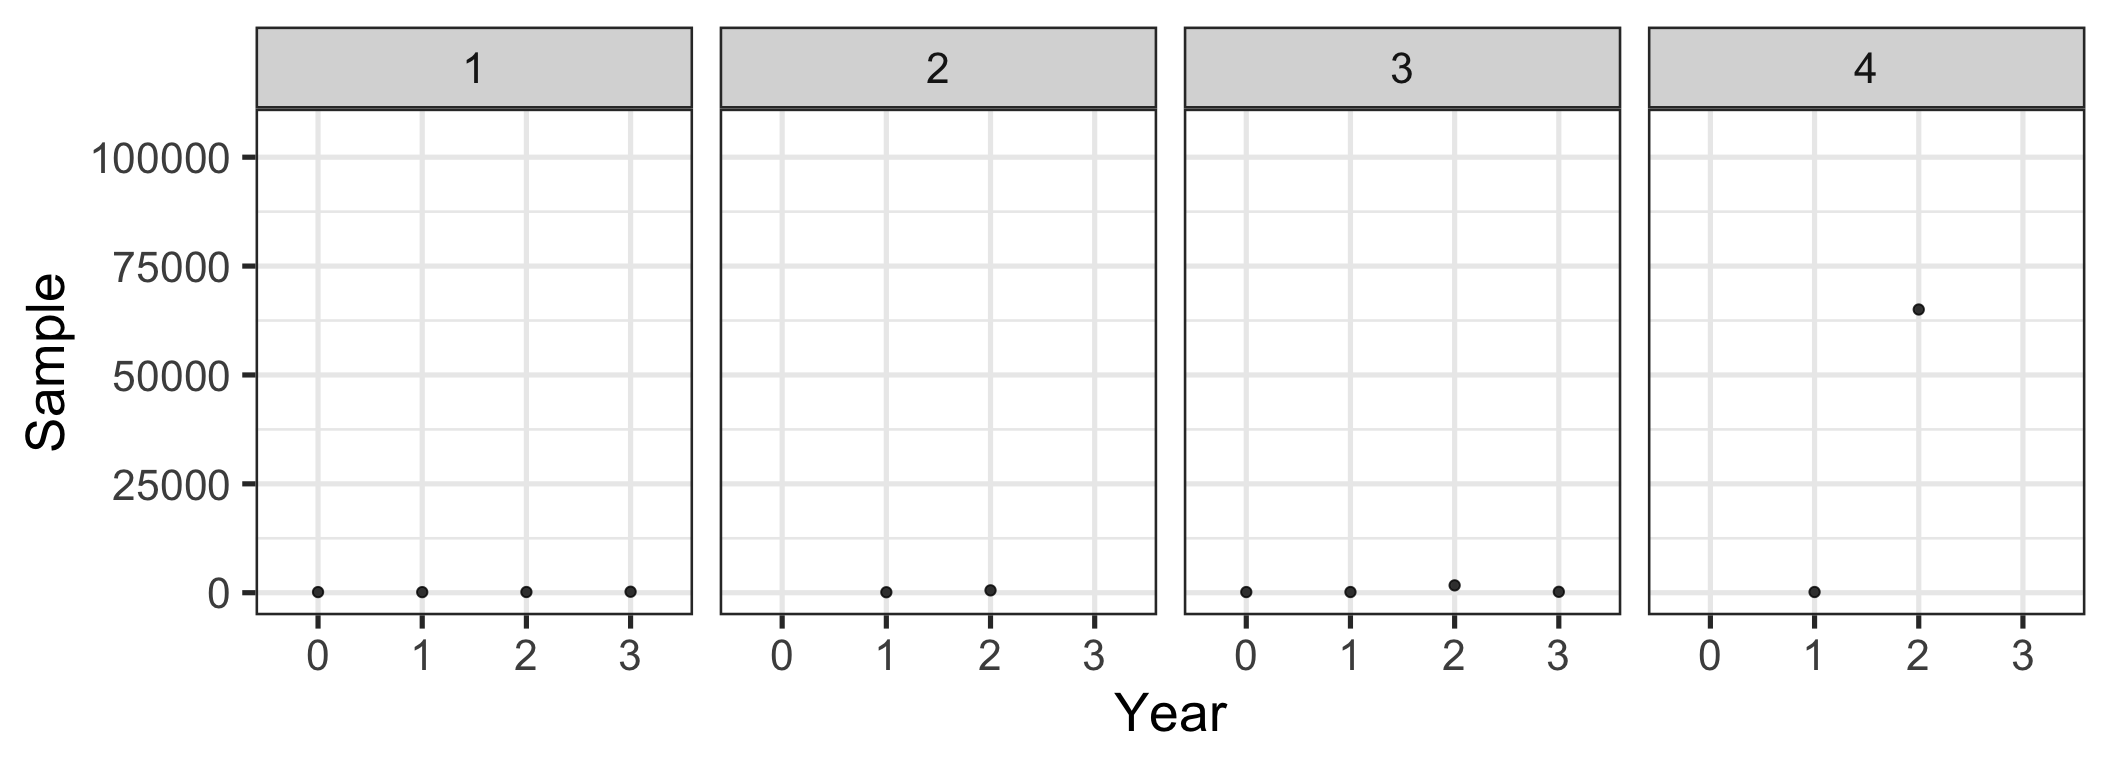 Change in median sample size over time by journal